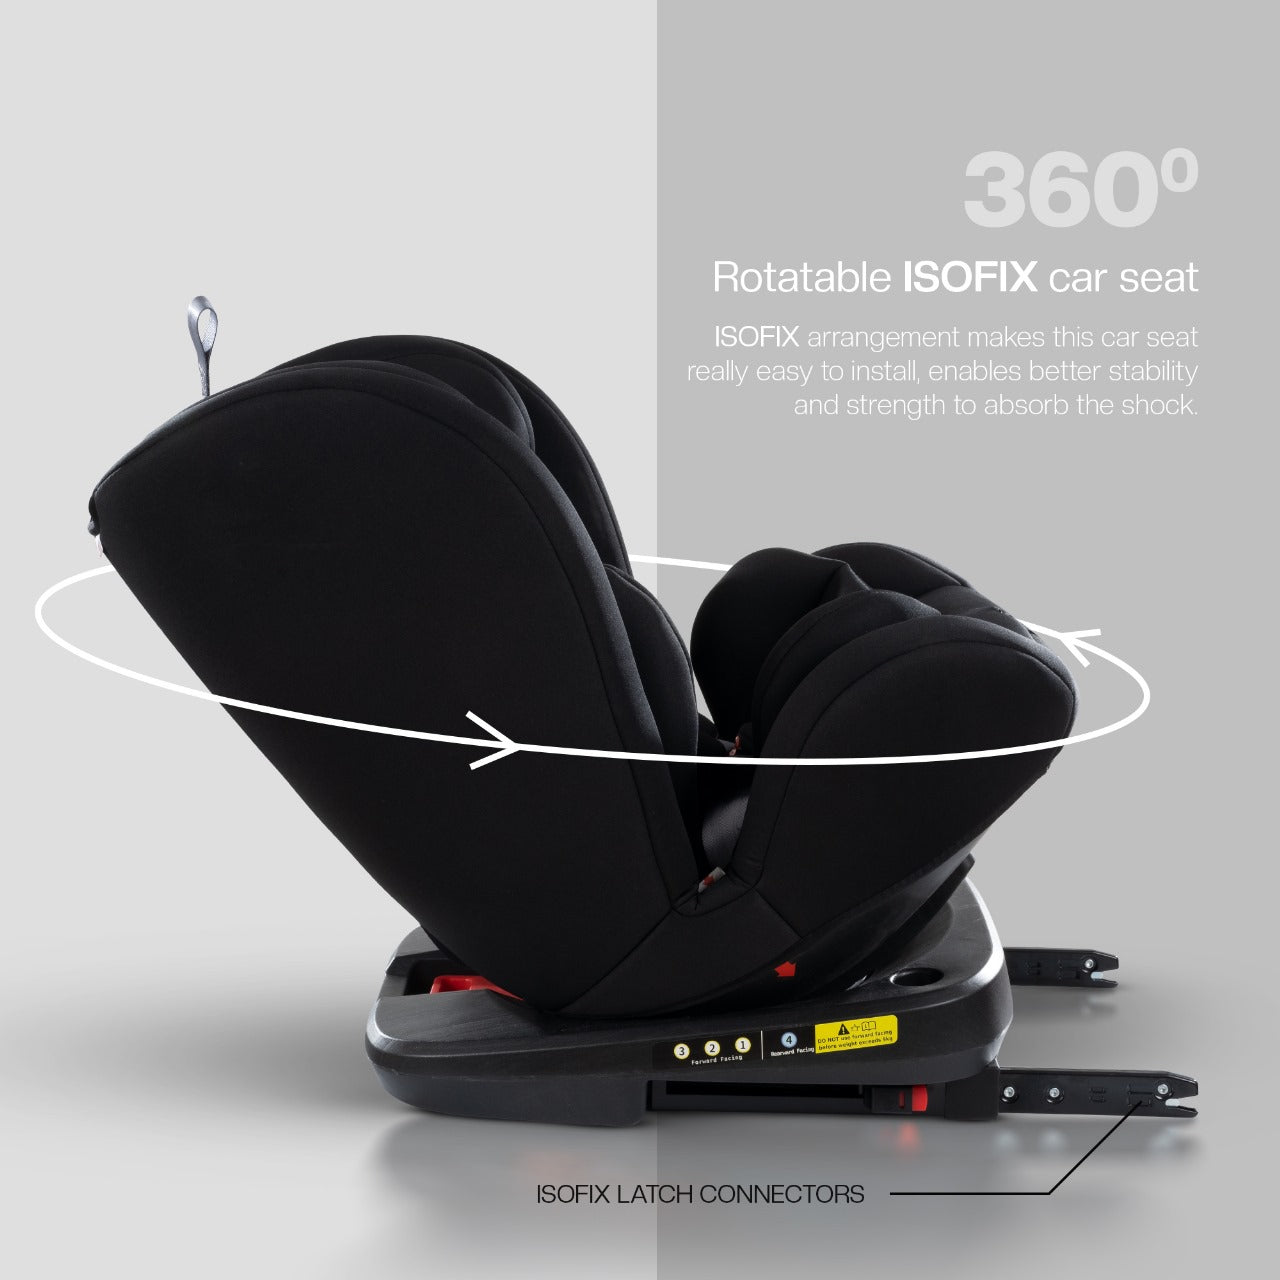 Burbay Grand ISOFIX 360 Rotatable Baby Car Seat I 0 Months -12 Years